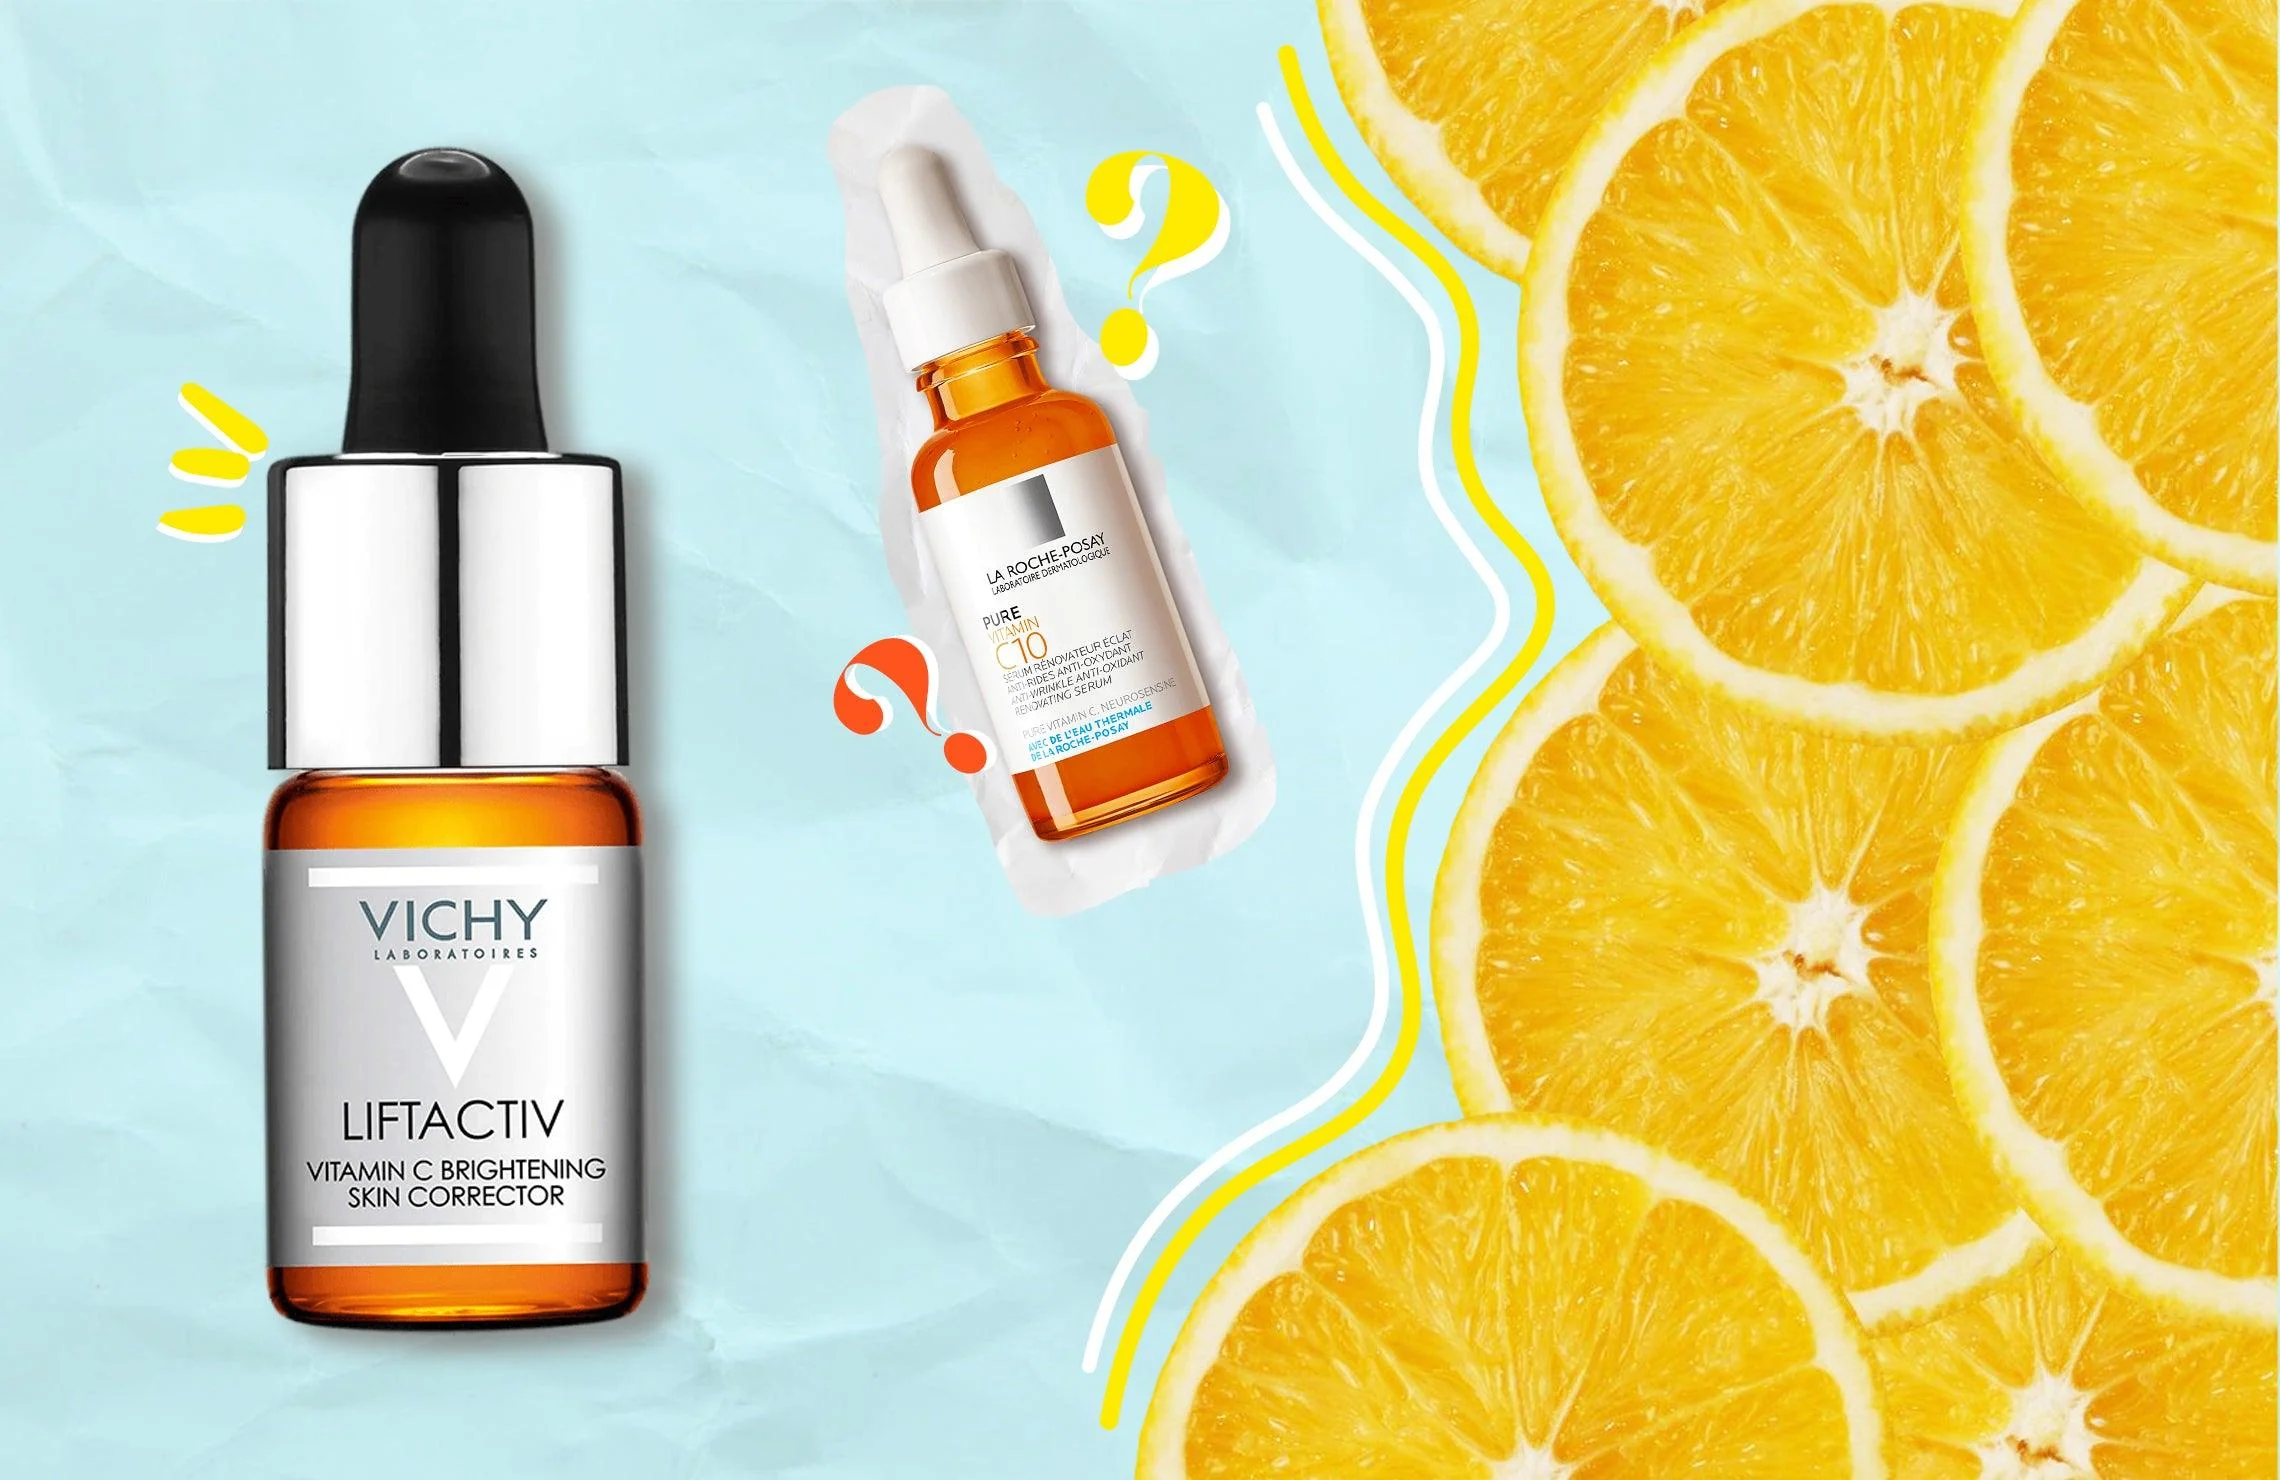 Vichy Vitamin C serum: Price, Benefits, Ingredients, How to use, Review?